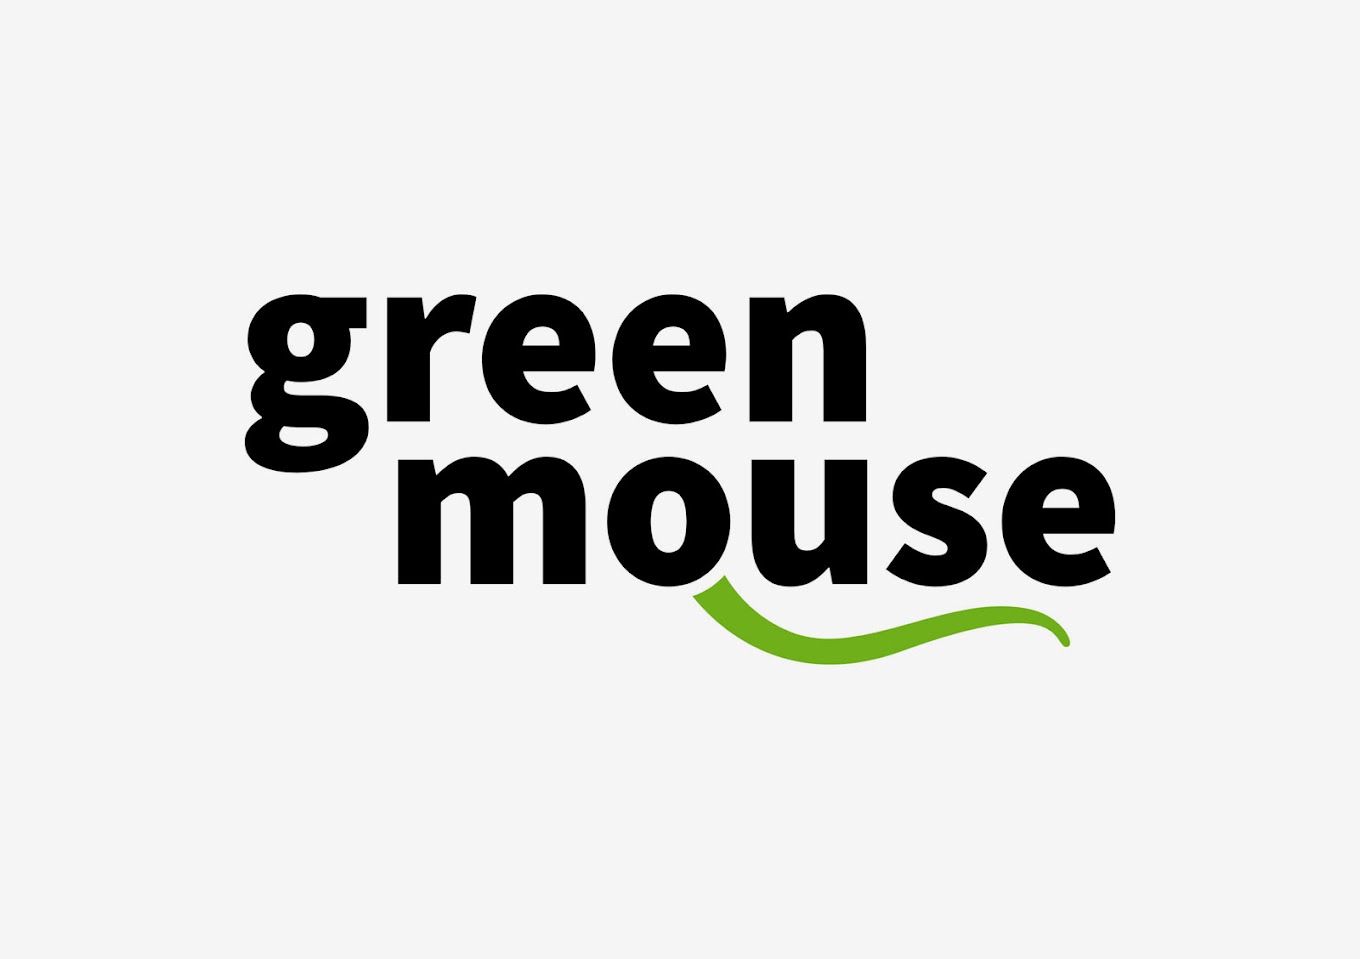 GreenMouse